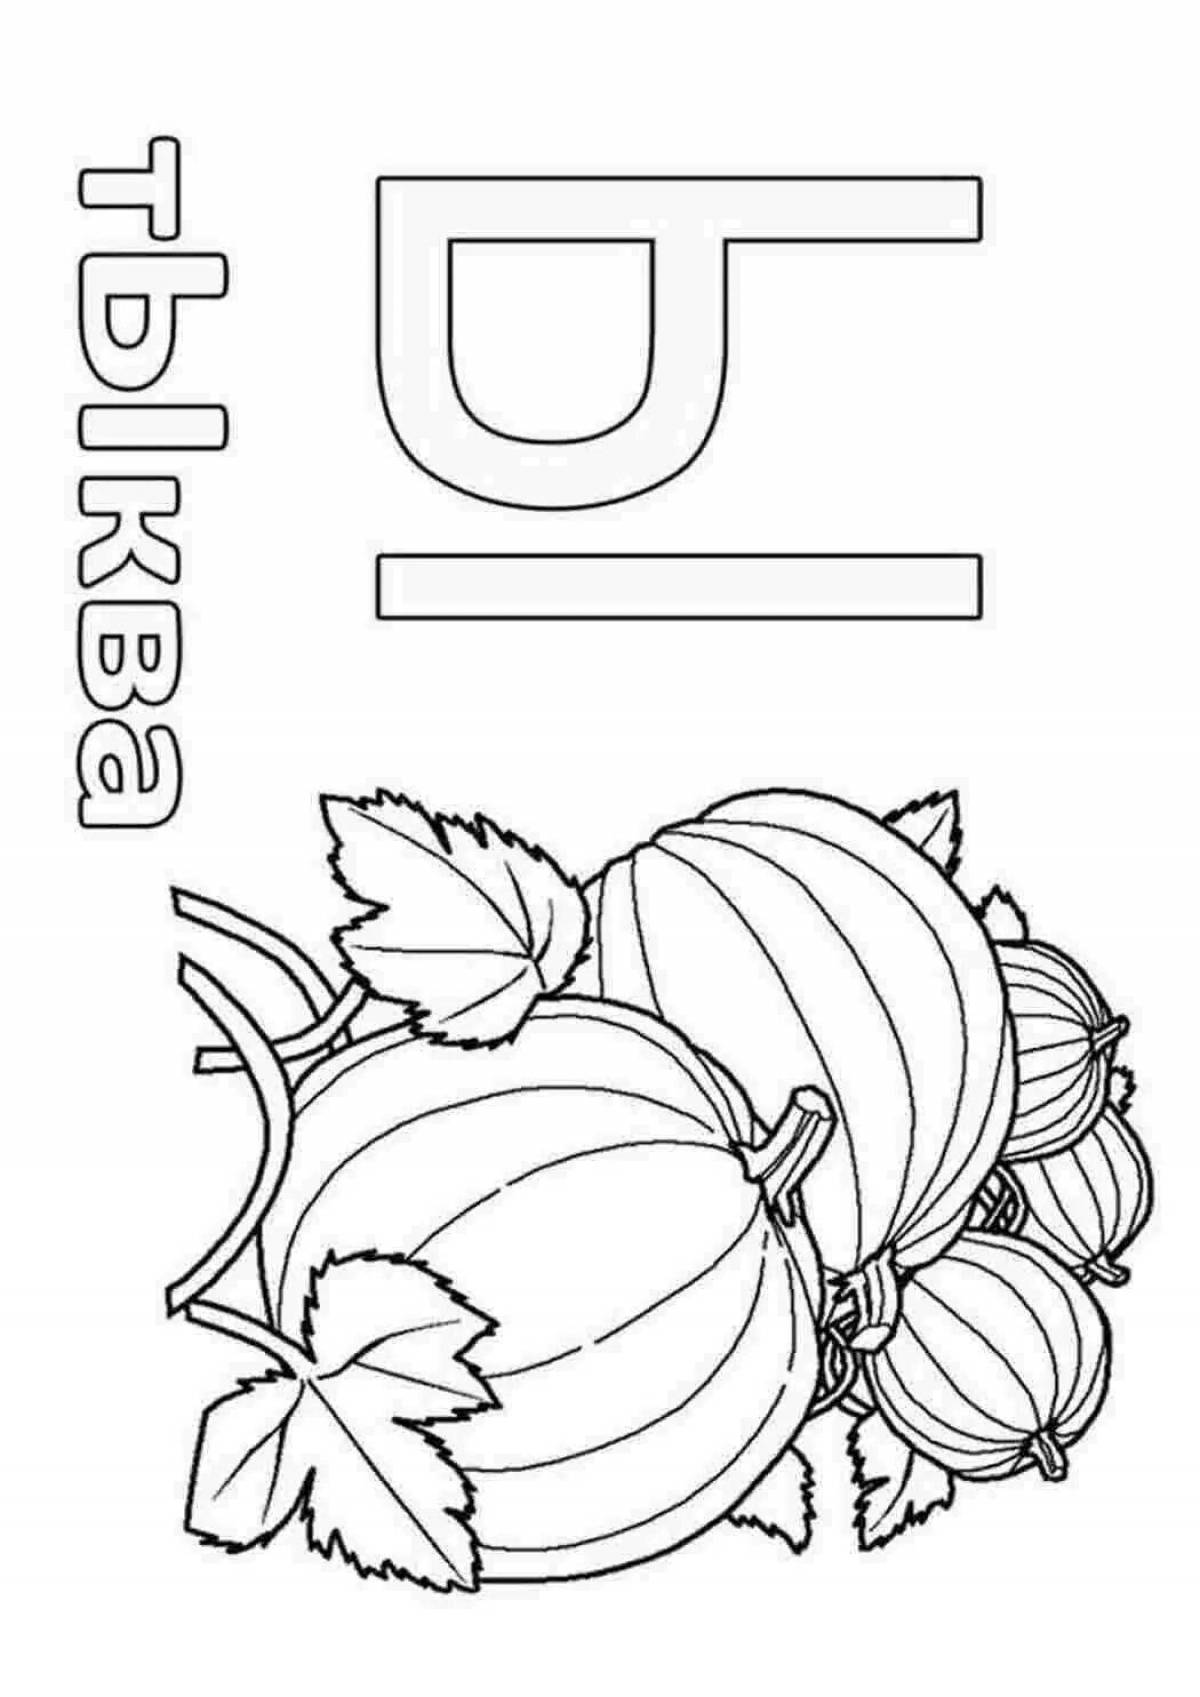 Fun letter s coloring book for preschoolers